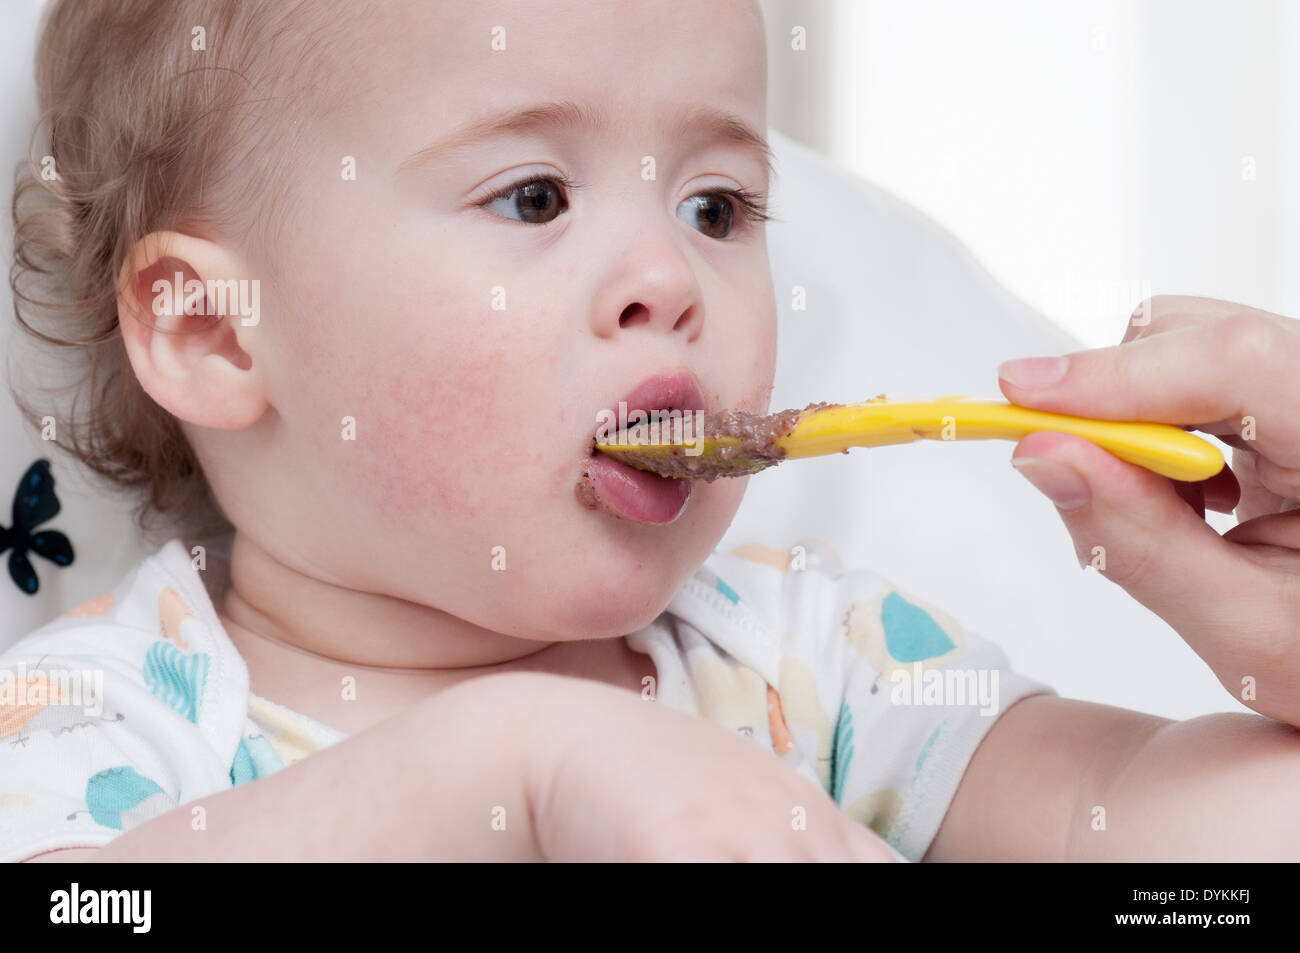 Baby in chair eating baby food from a spoon Stock Photo